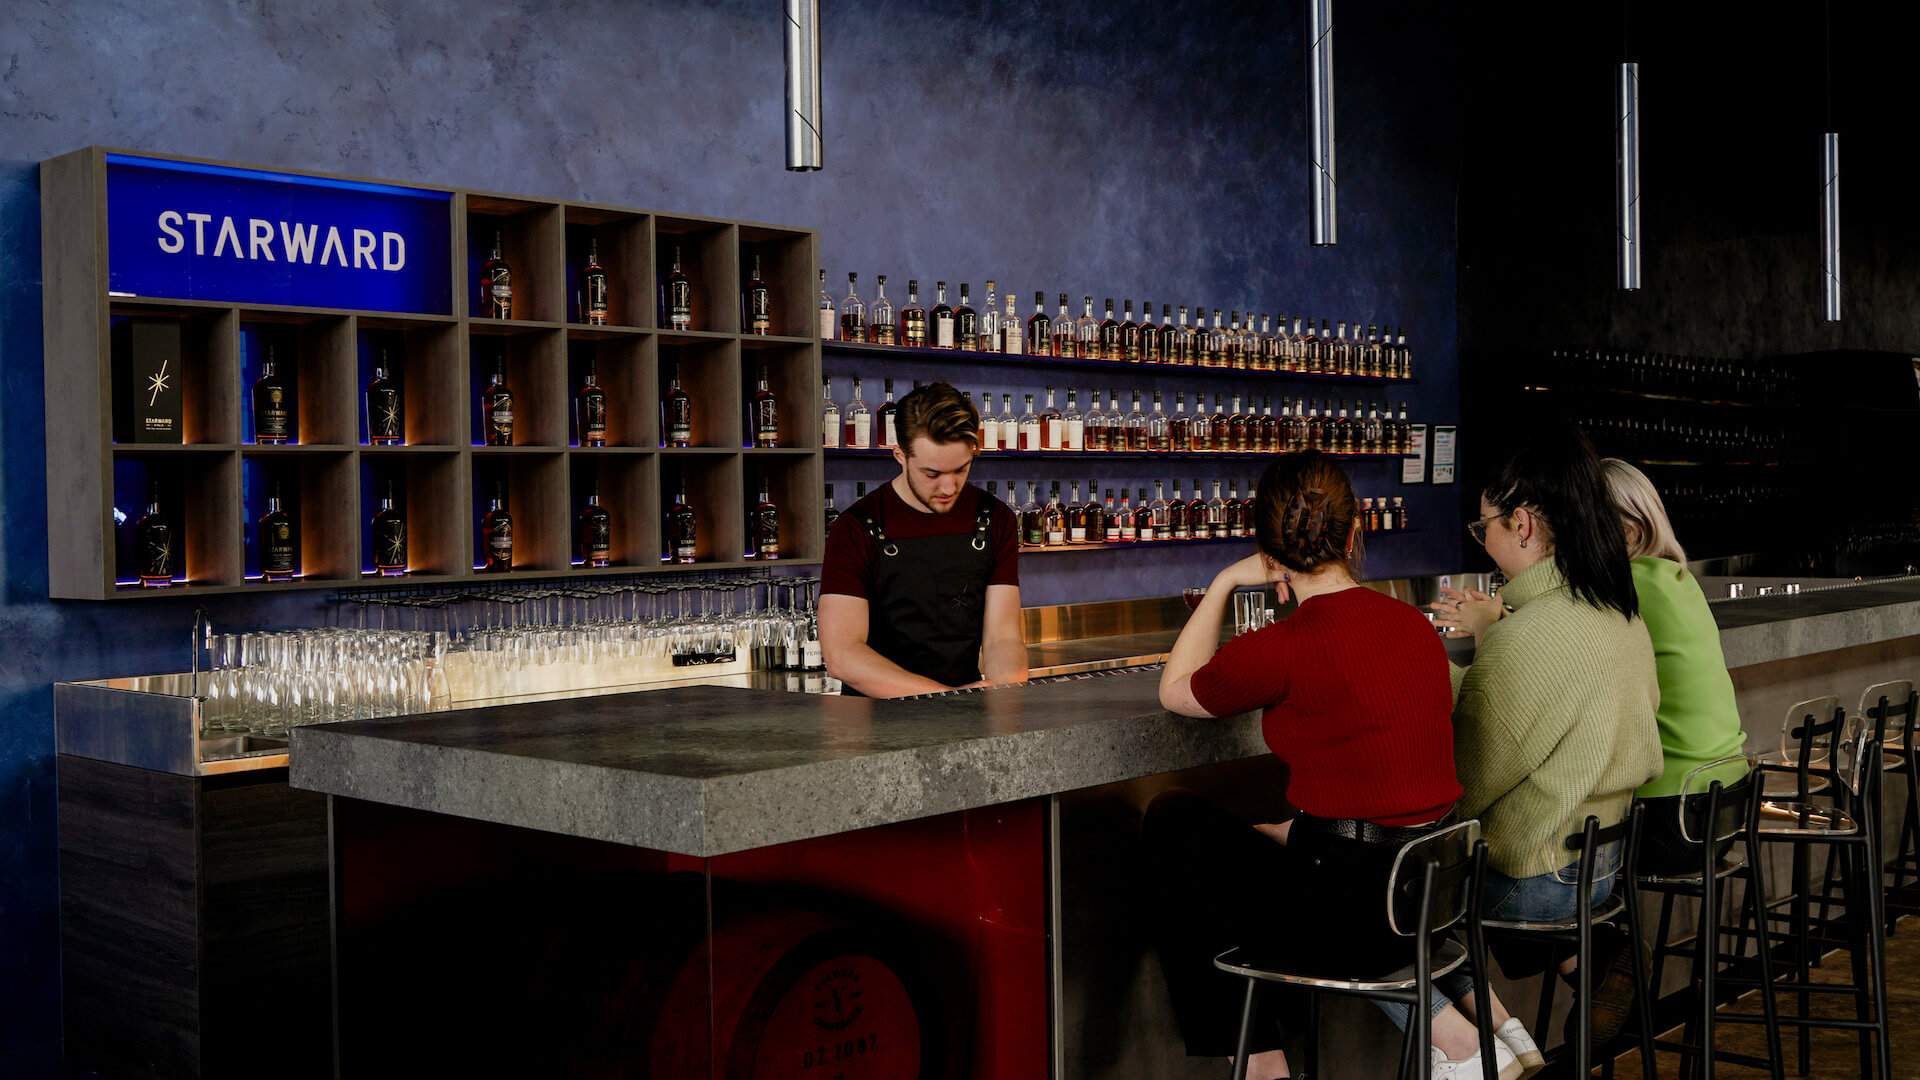 Starward Whisky Distillery and Bar in Port Melbourne